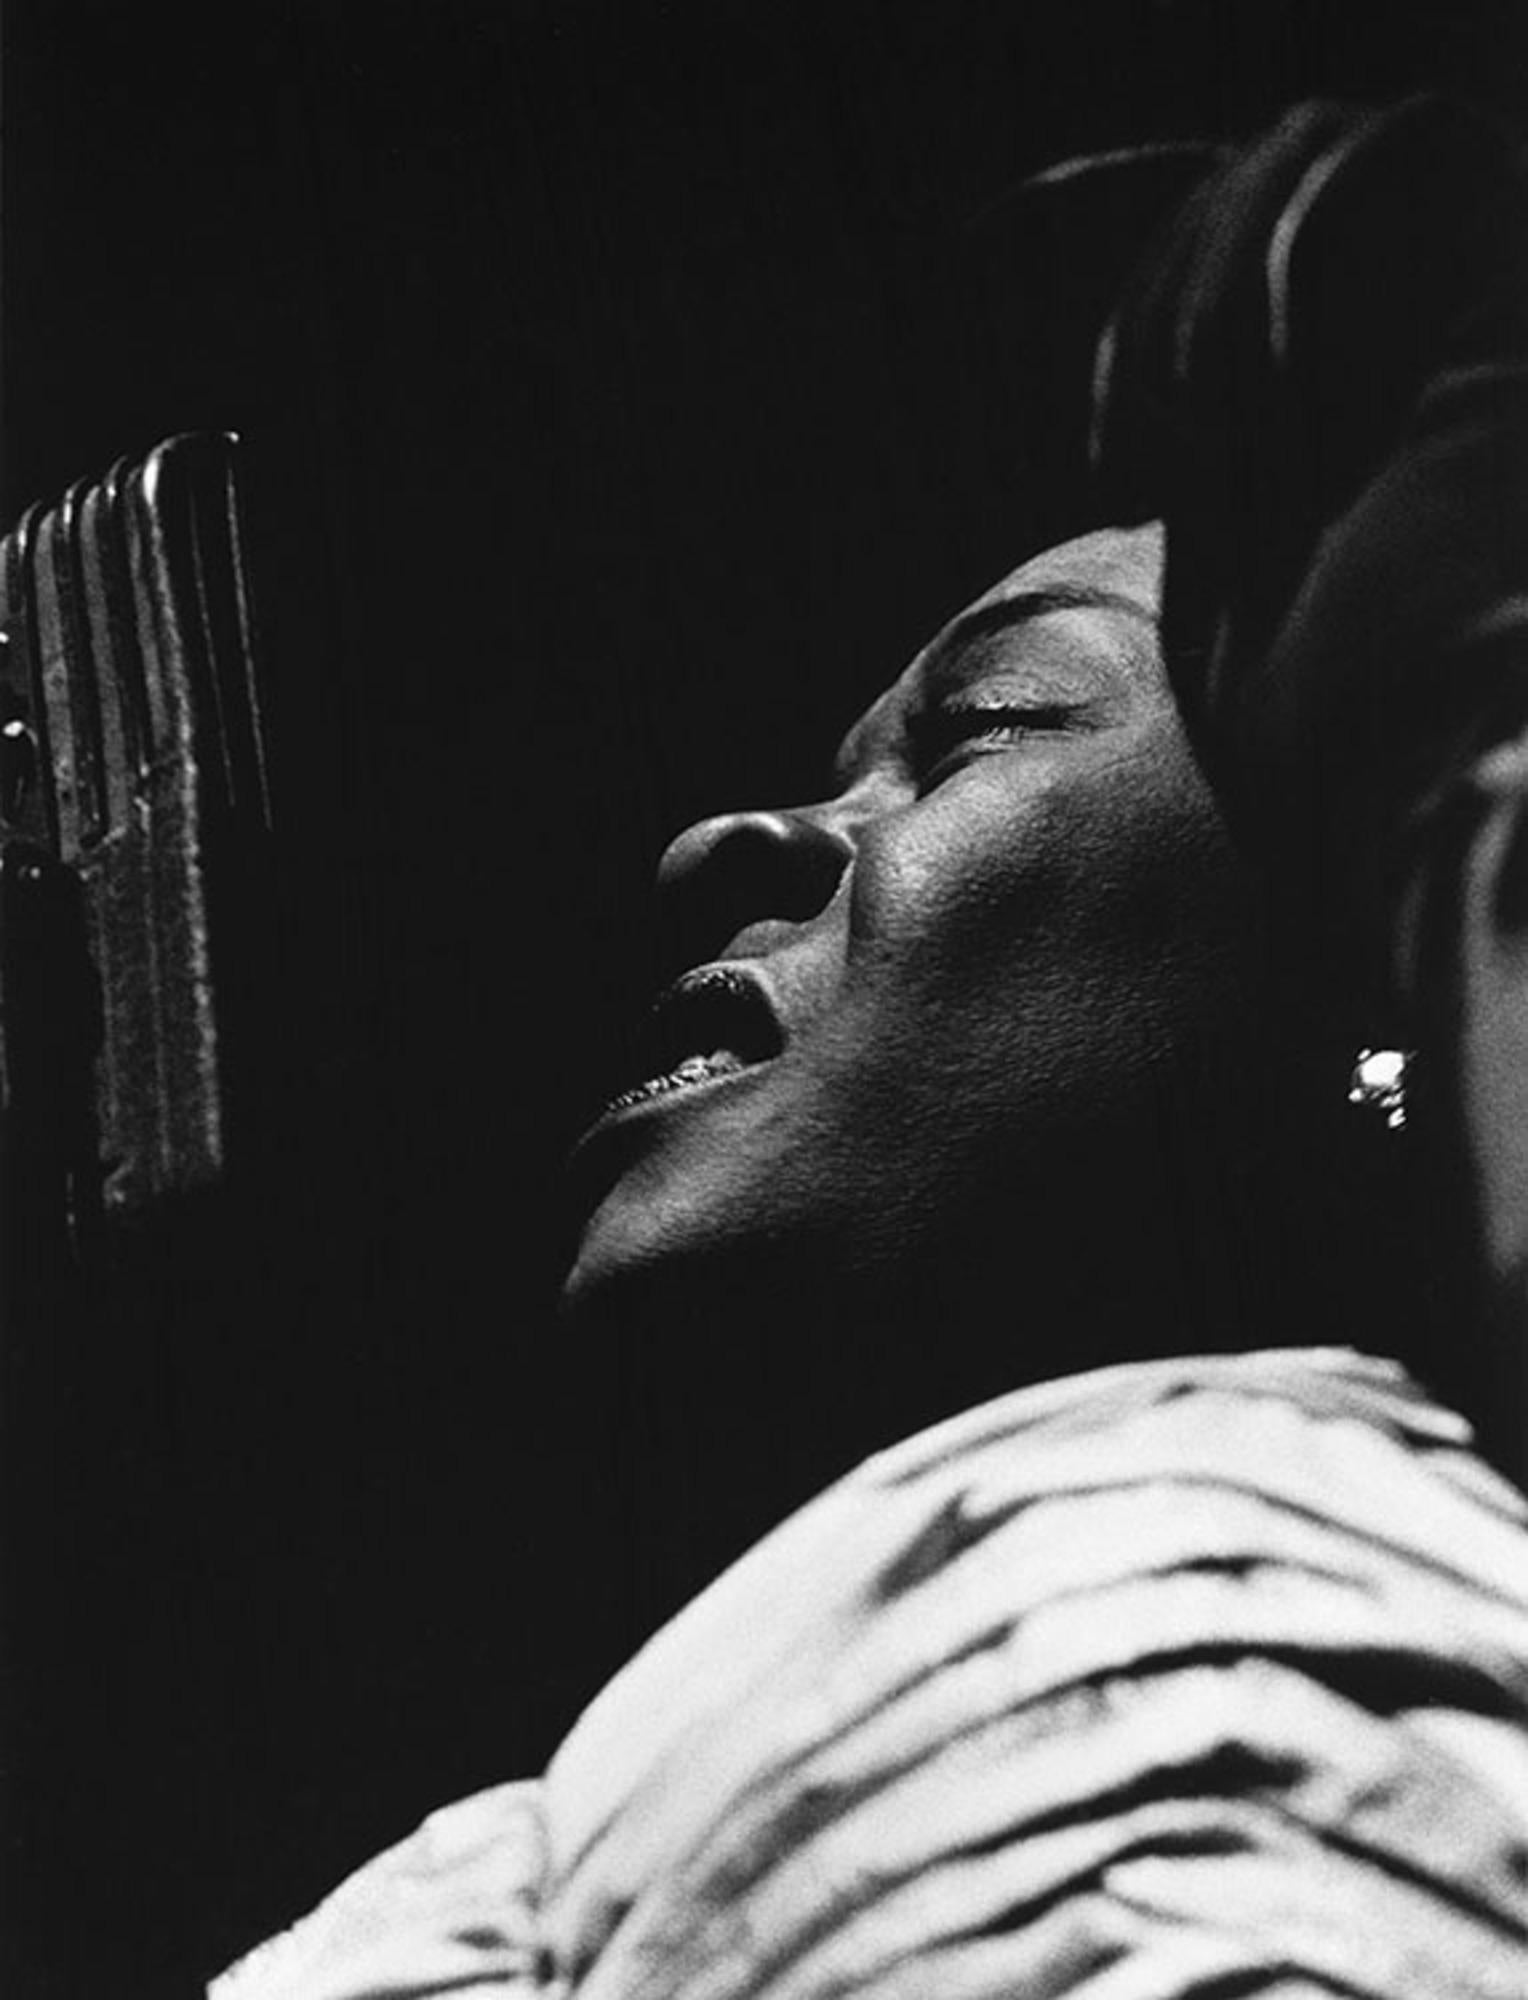 Title: Dinah Washington, Civic Opera House, Chicago, IL

Estate-stamped, gelatin-print silver

American singer and pianist, Dinah Washington on stage at Civic Opera House, Chicago, IL, US, 1956.

Available sizes: 
20”x16" Edition of 25
24”x20"